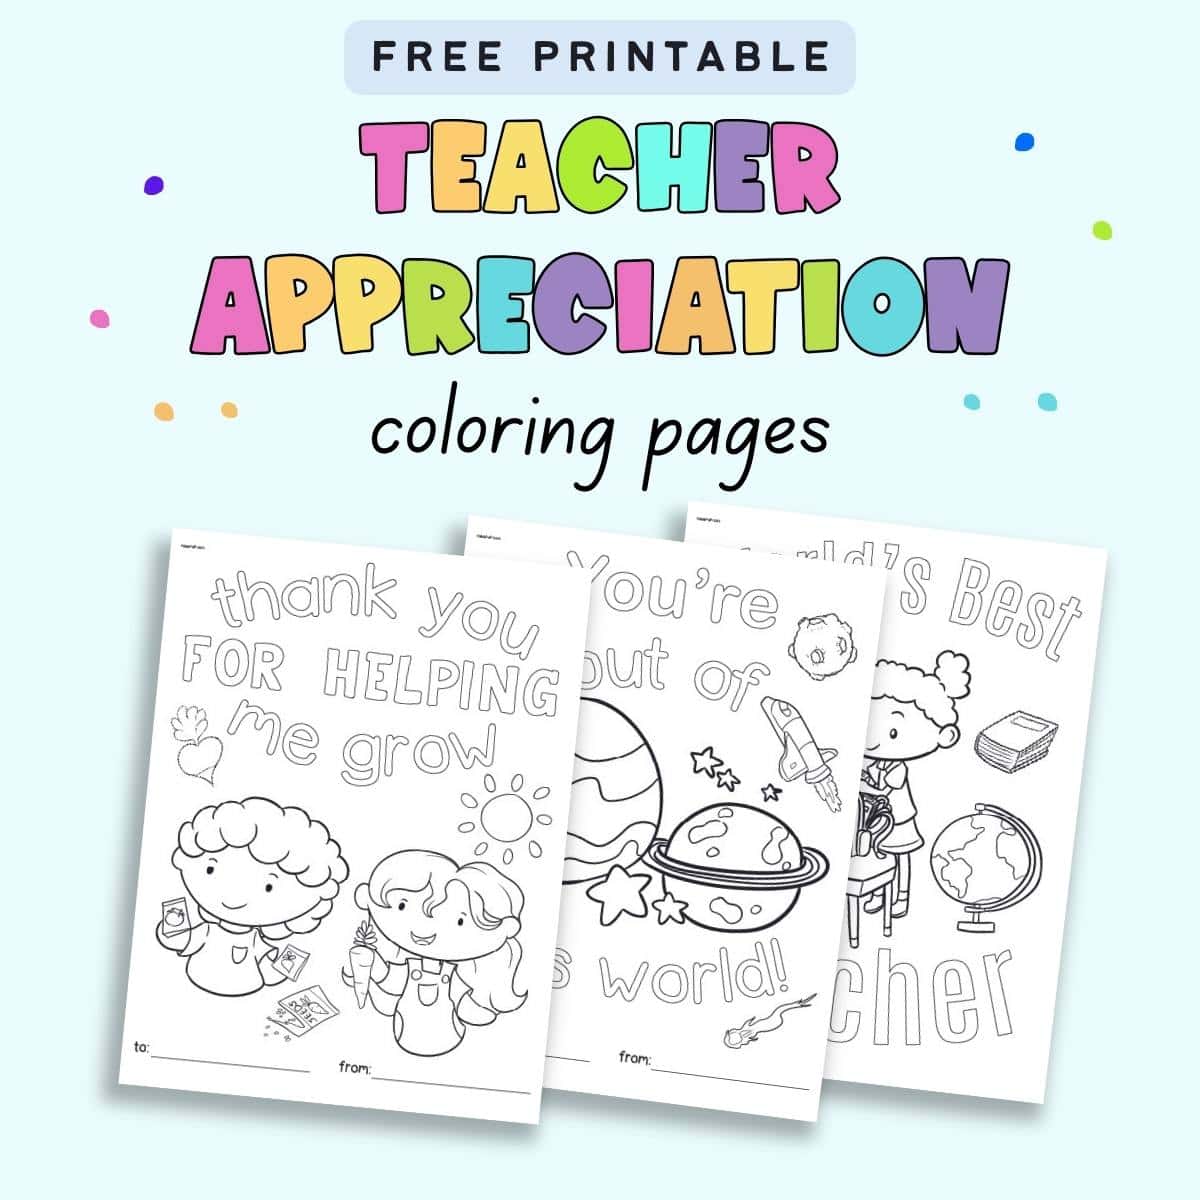 Text "free printable teacher appreciation coloring pages" with a  preview of three pages